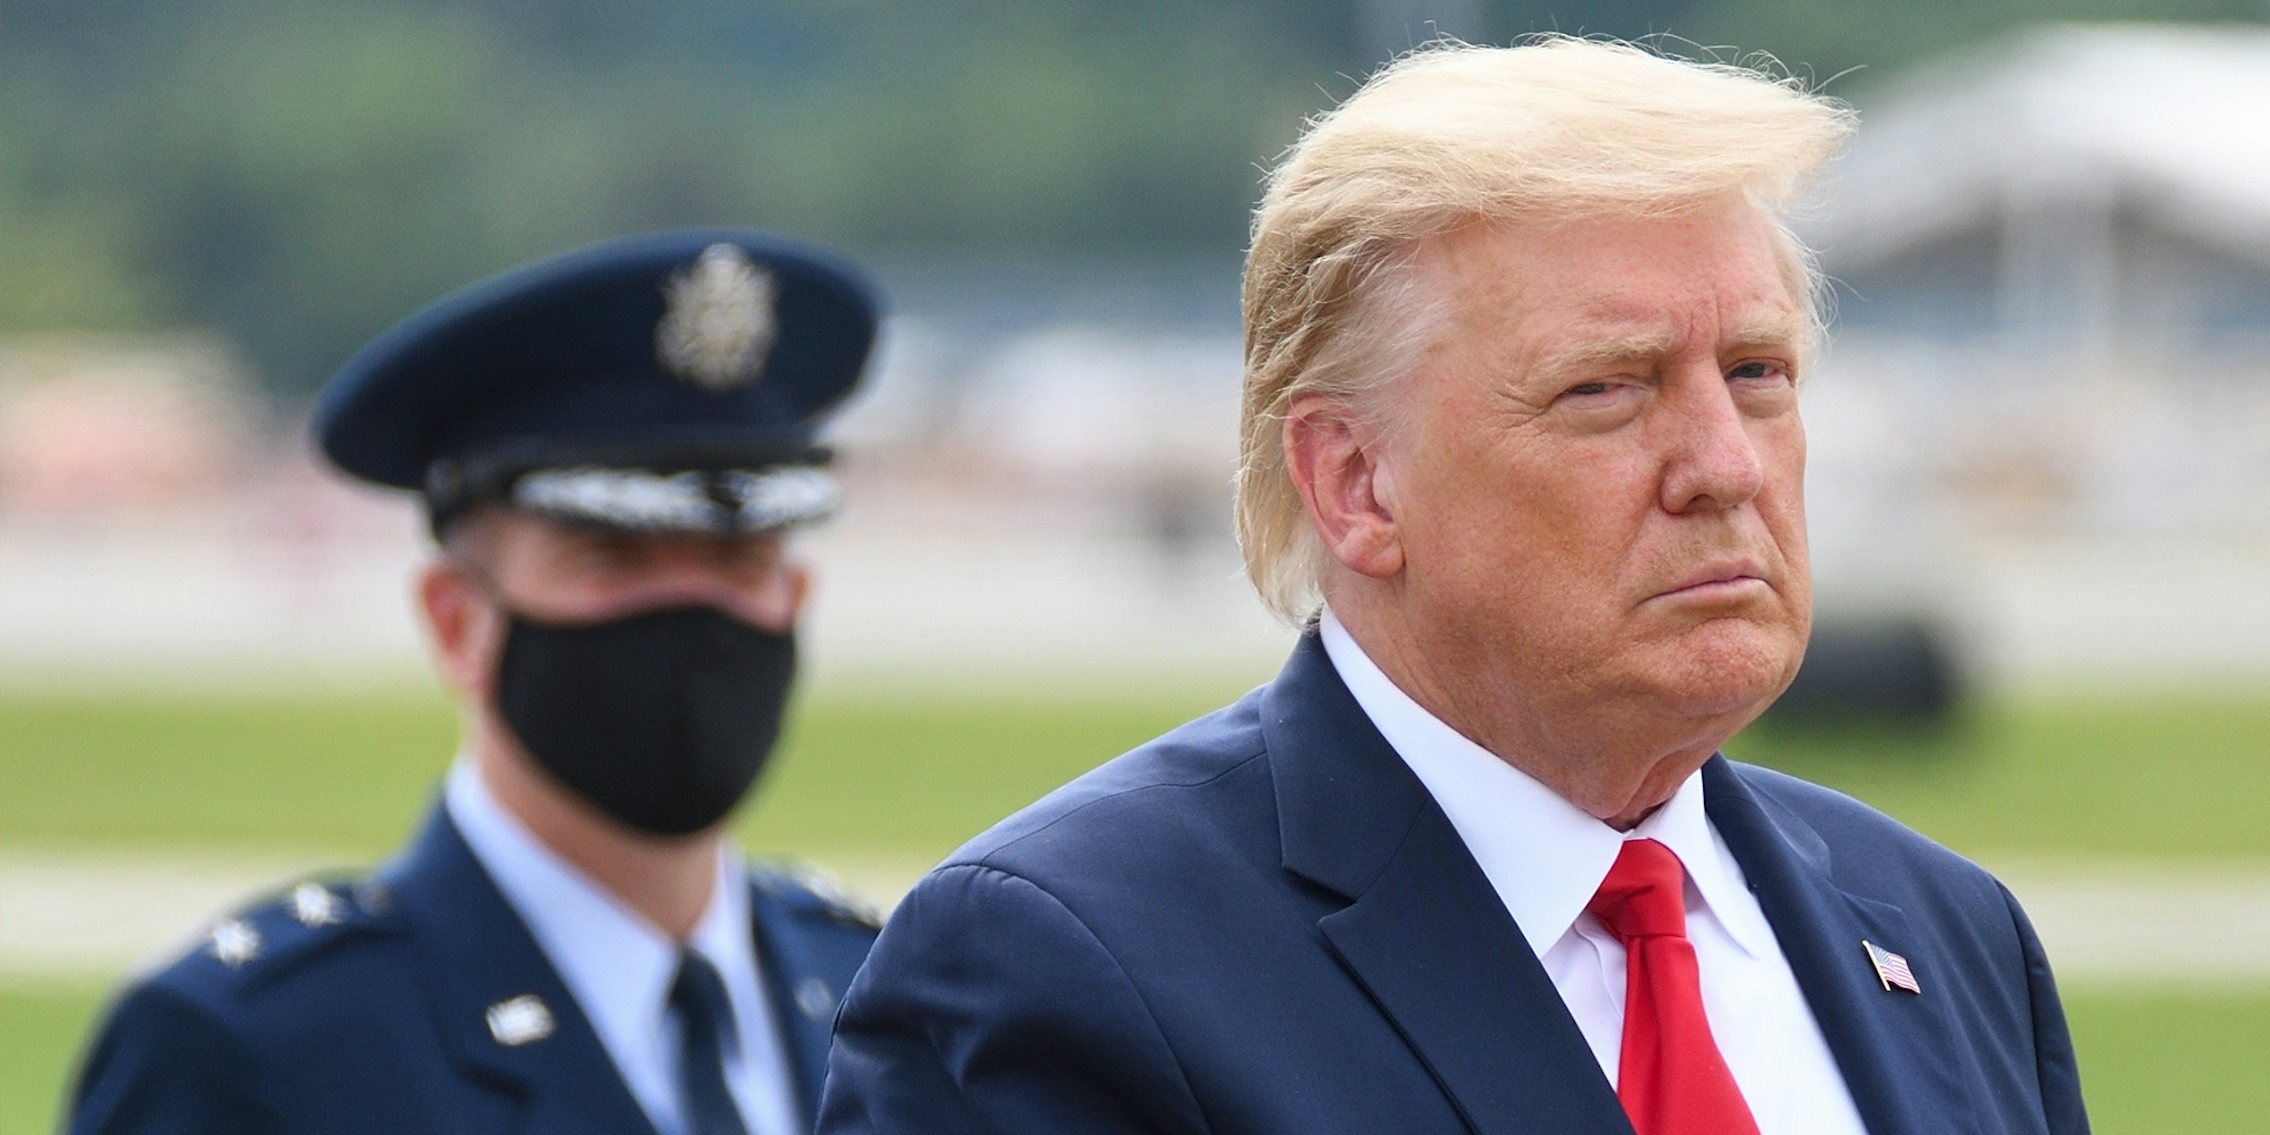 President Donald Trump outside with Air Force Major General John P. Healy in the background